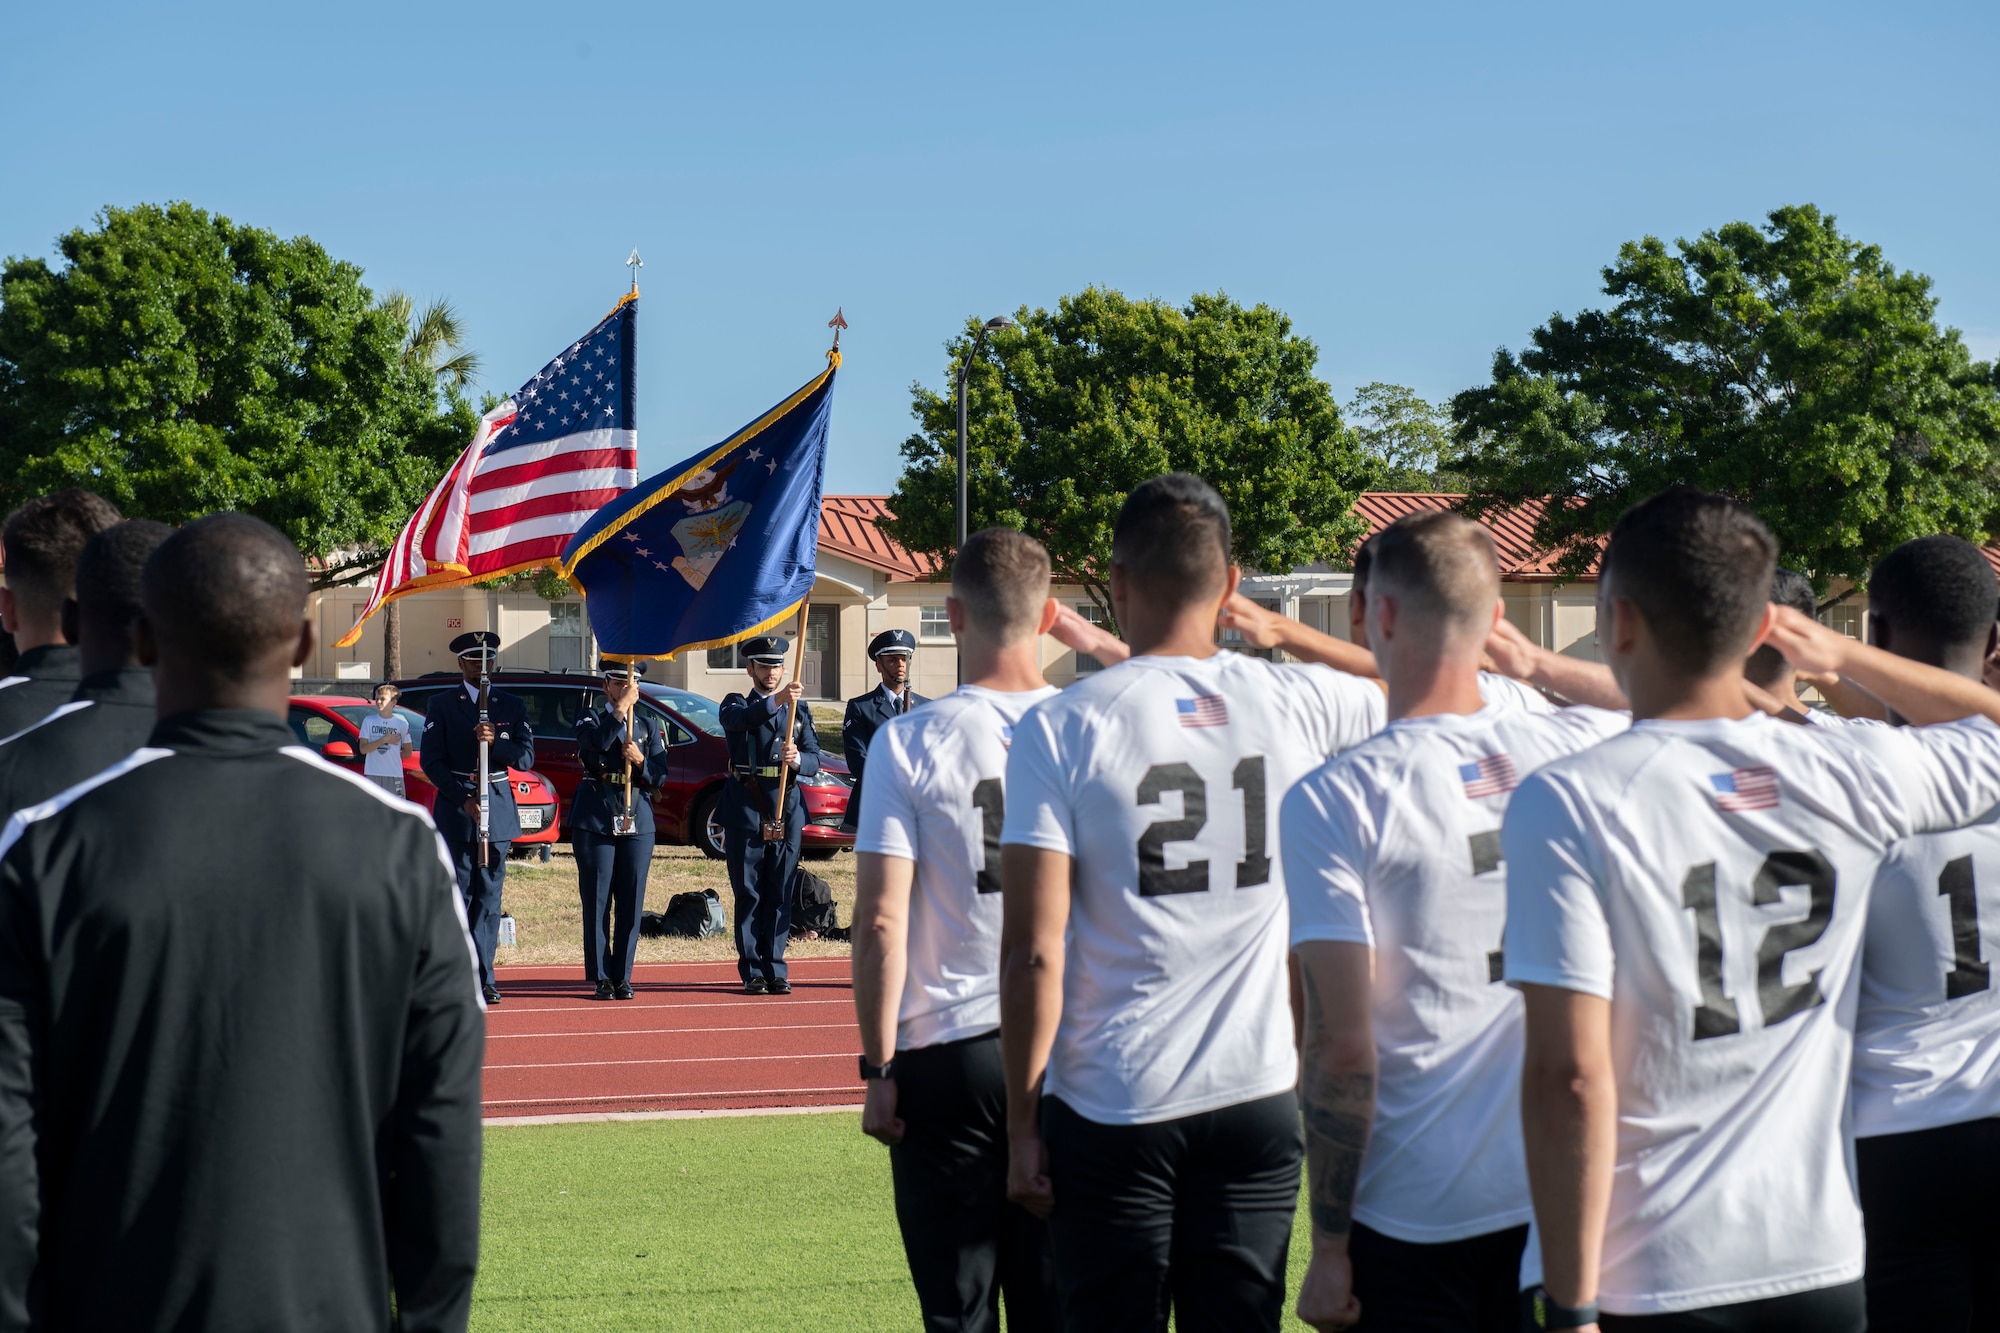 U.S. service members stand in formation during the opening ceremony of the Armed Forces Men’s Soccer Tournament at MacDill Air Force Base, Florida, March 6, 2022.